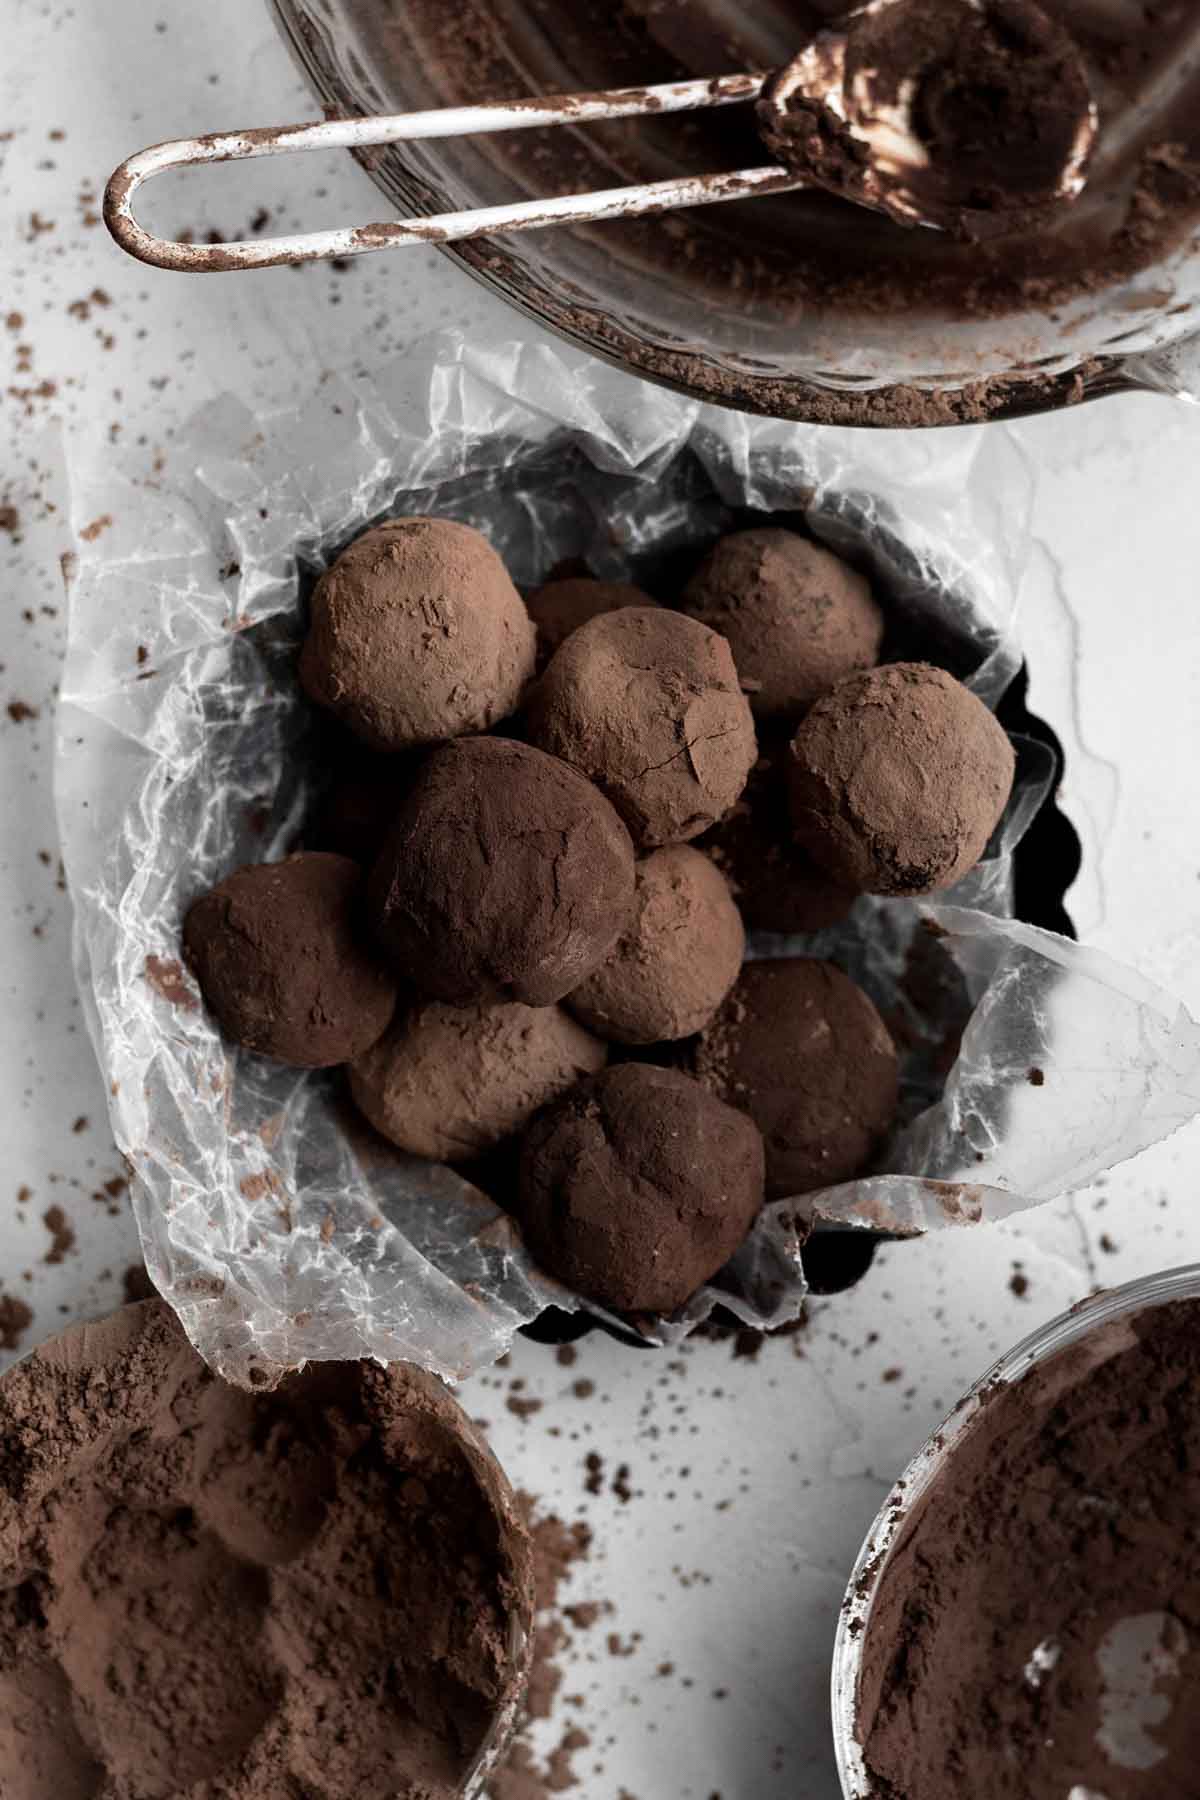 Truffles freshly dusted in either regular cocoa powder or dark cocoa powder.